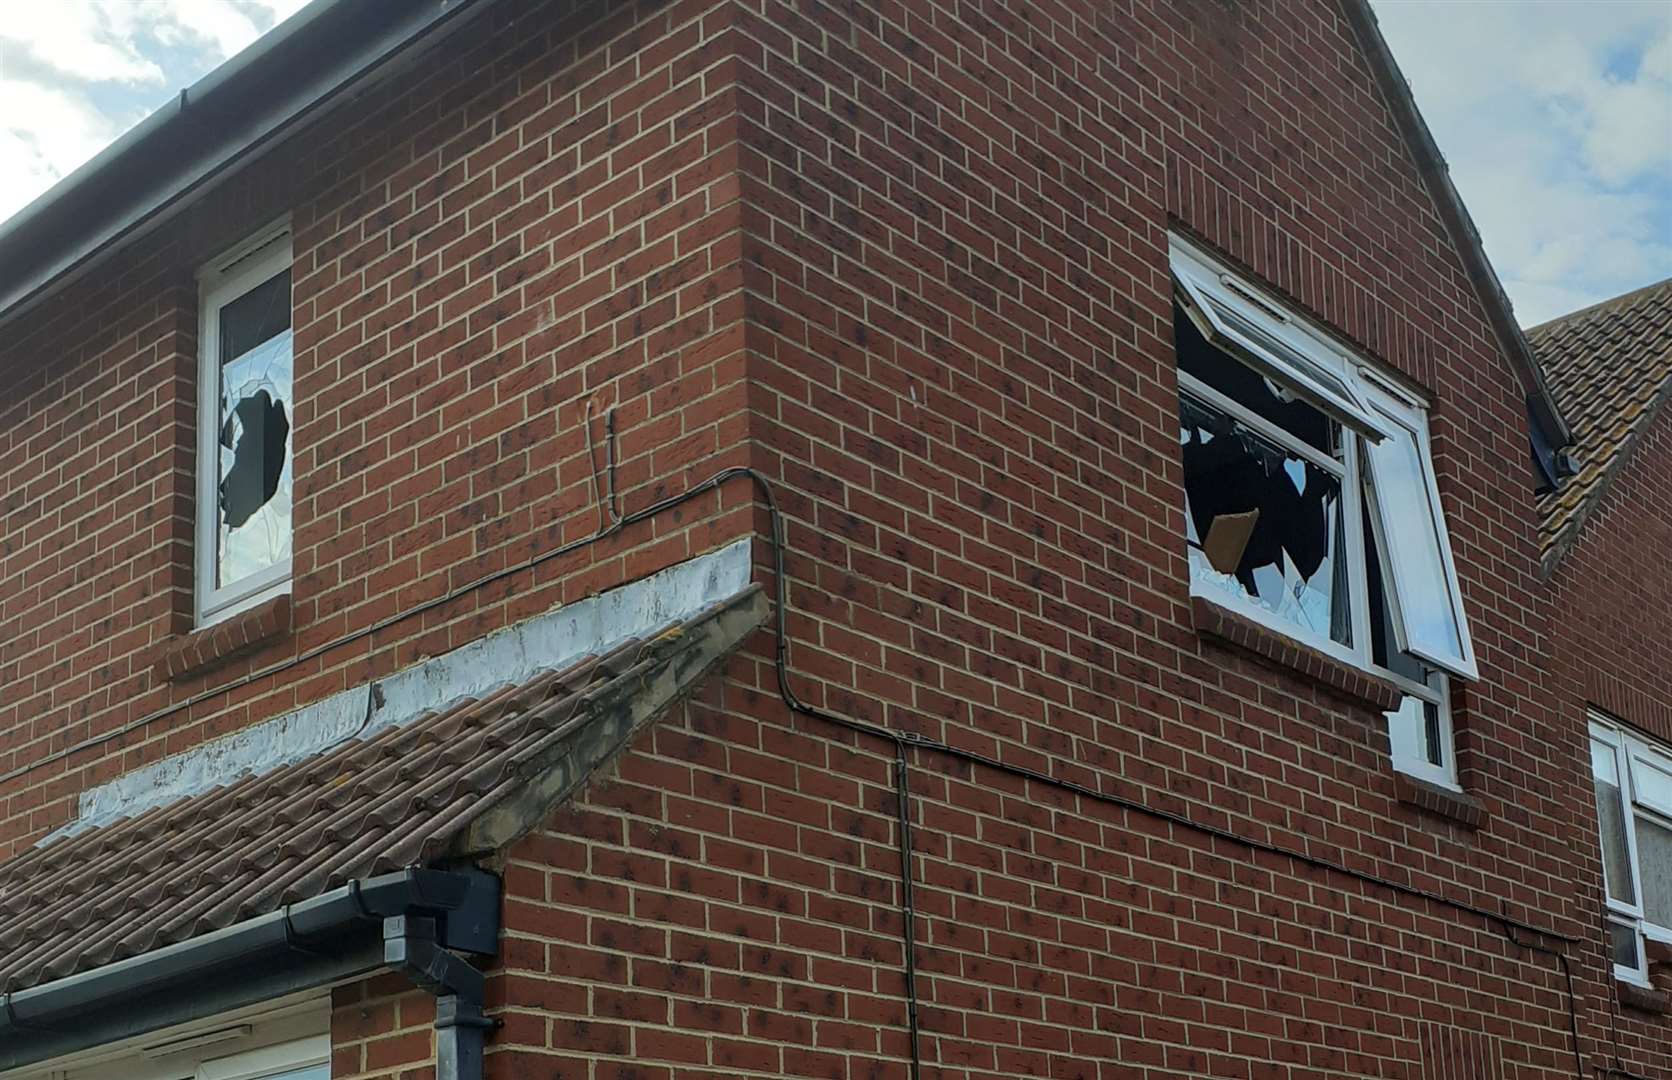 Police were called to Osprey Court in Sittingbourne after a man was "threatening people with knives" and some windows were smashed. Picture: Ken Rowles